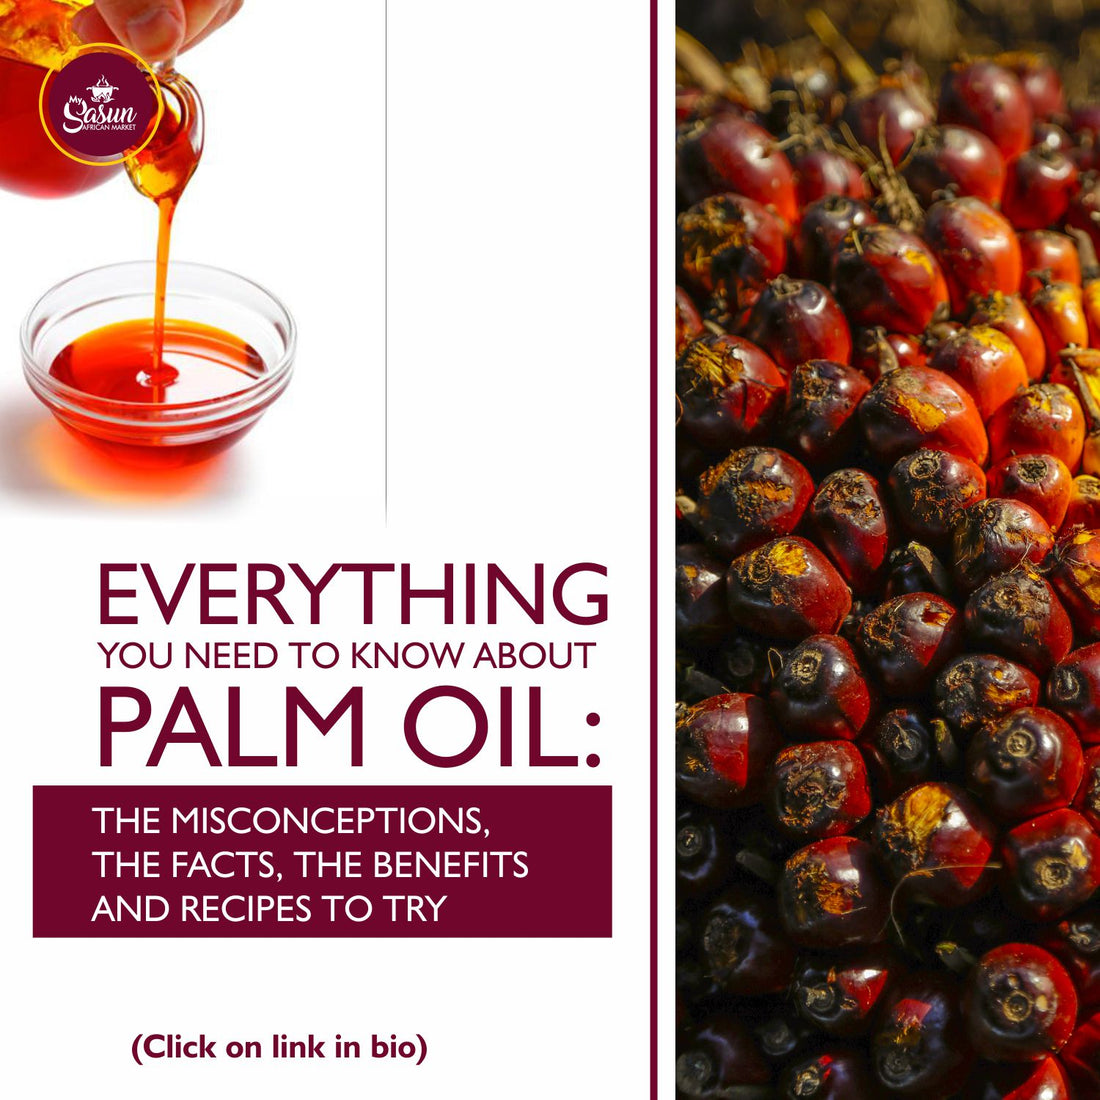 EVERYTHING YOU NEED TO KNOW ABOUT PALM OIL: THE MISCONCEPTIONS, THE FACTS, THE BENEFITS AND RECIPES TO TRY